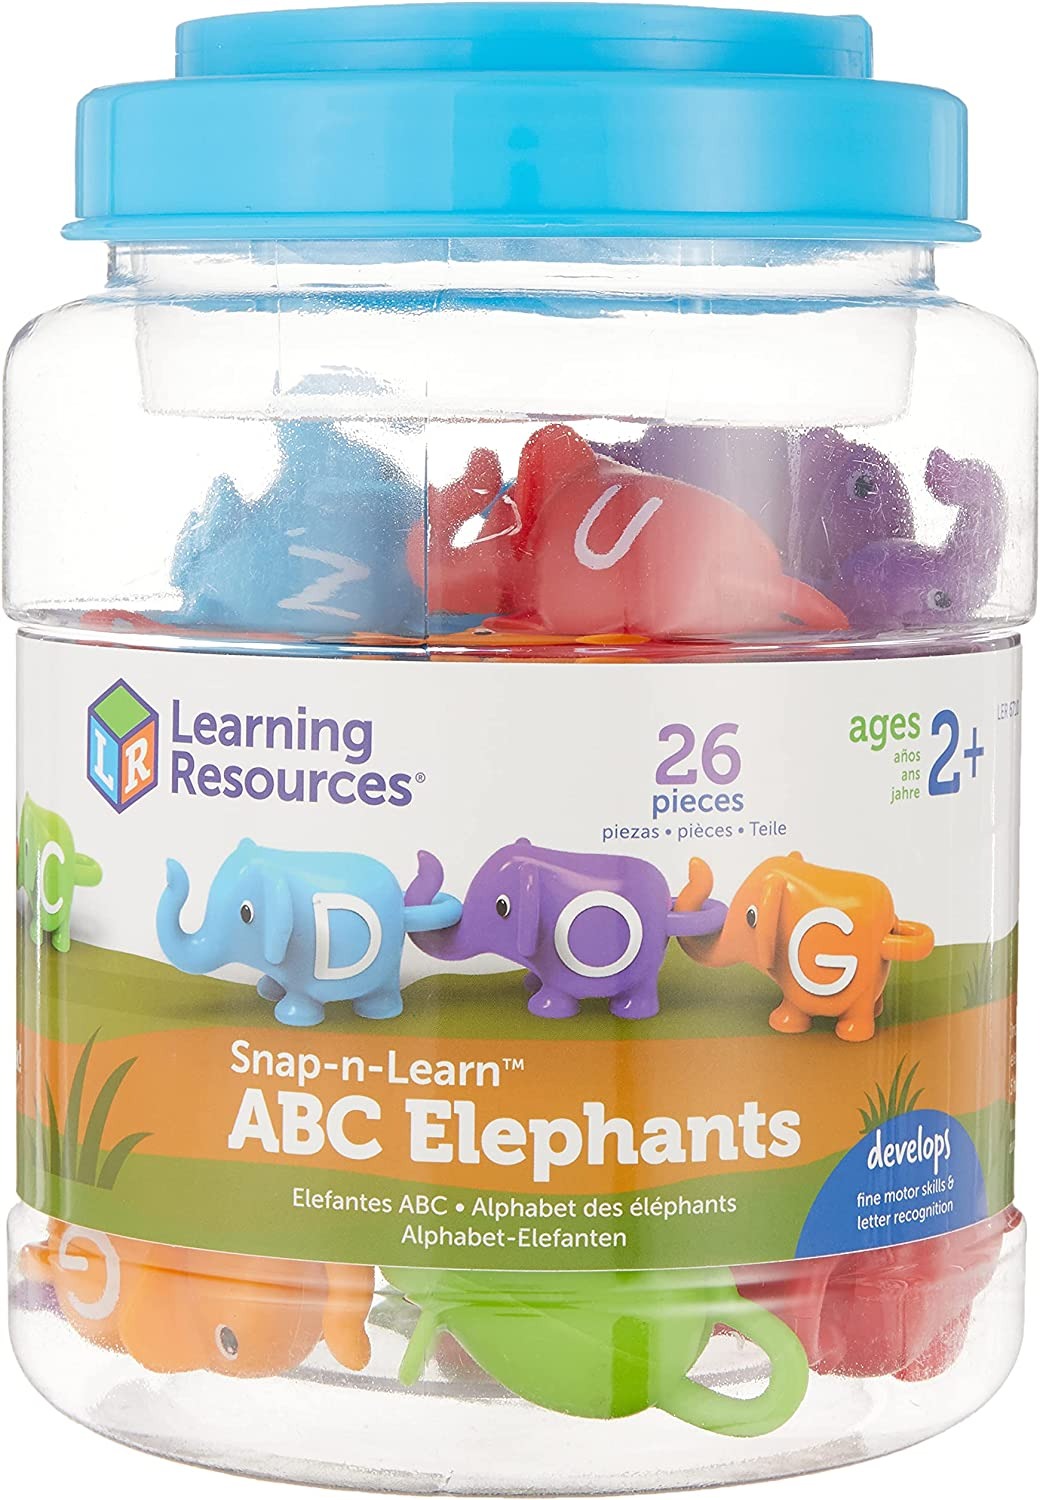 Snap-n-Learn ABC Elephants, The elephants are on parade, and they're bringing the alphabet with them! Kids learn their ABCs during imaginative animal play sessions with the Snap-n-Learn ABC Elephants. Printed with every letter of the alphabet, these 26 colourful elephants come with snap-together trunks and tails that make learning language skills easy and fun. Snap-n-Learn ABC Elephants come in five vibrant colours-red, orange, green, blue, and purple-and their easy-to-grab plastic construction makes it sim